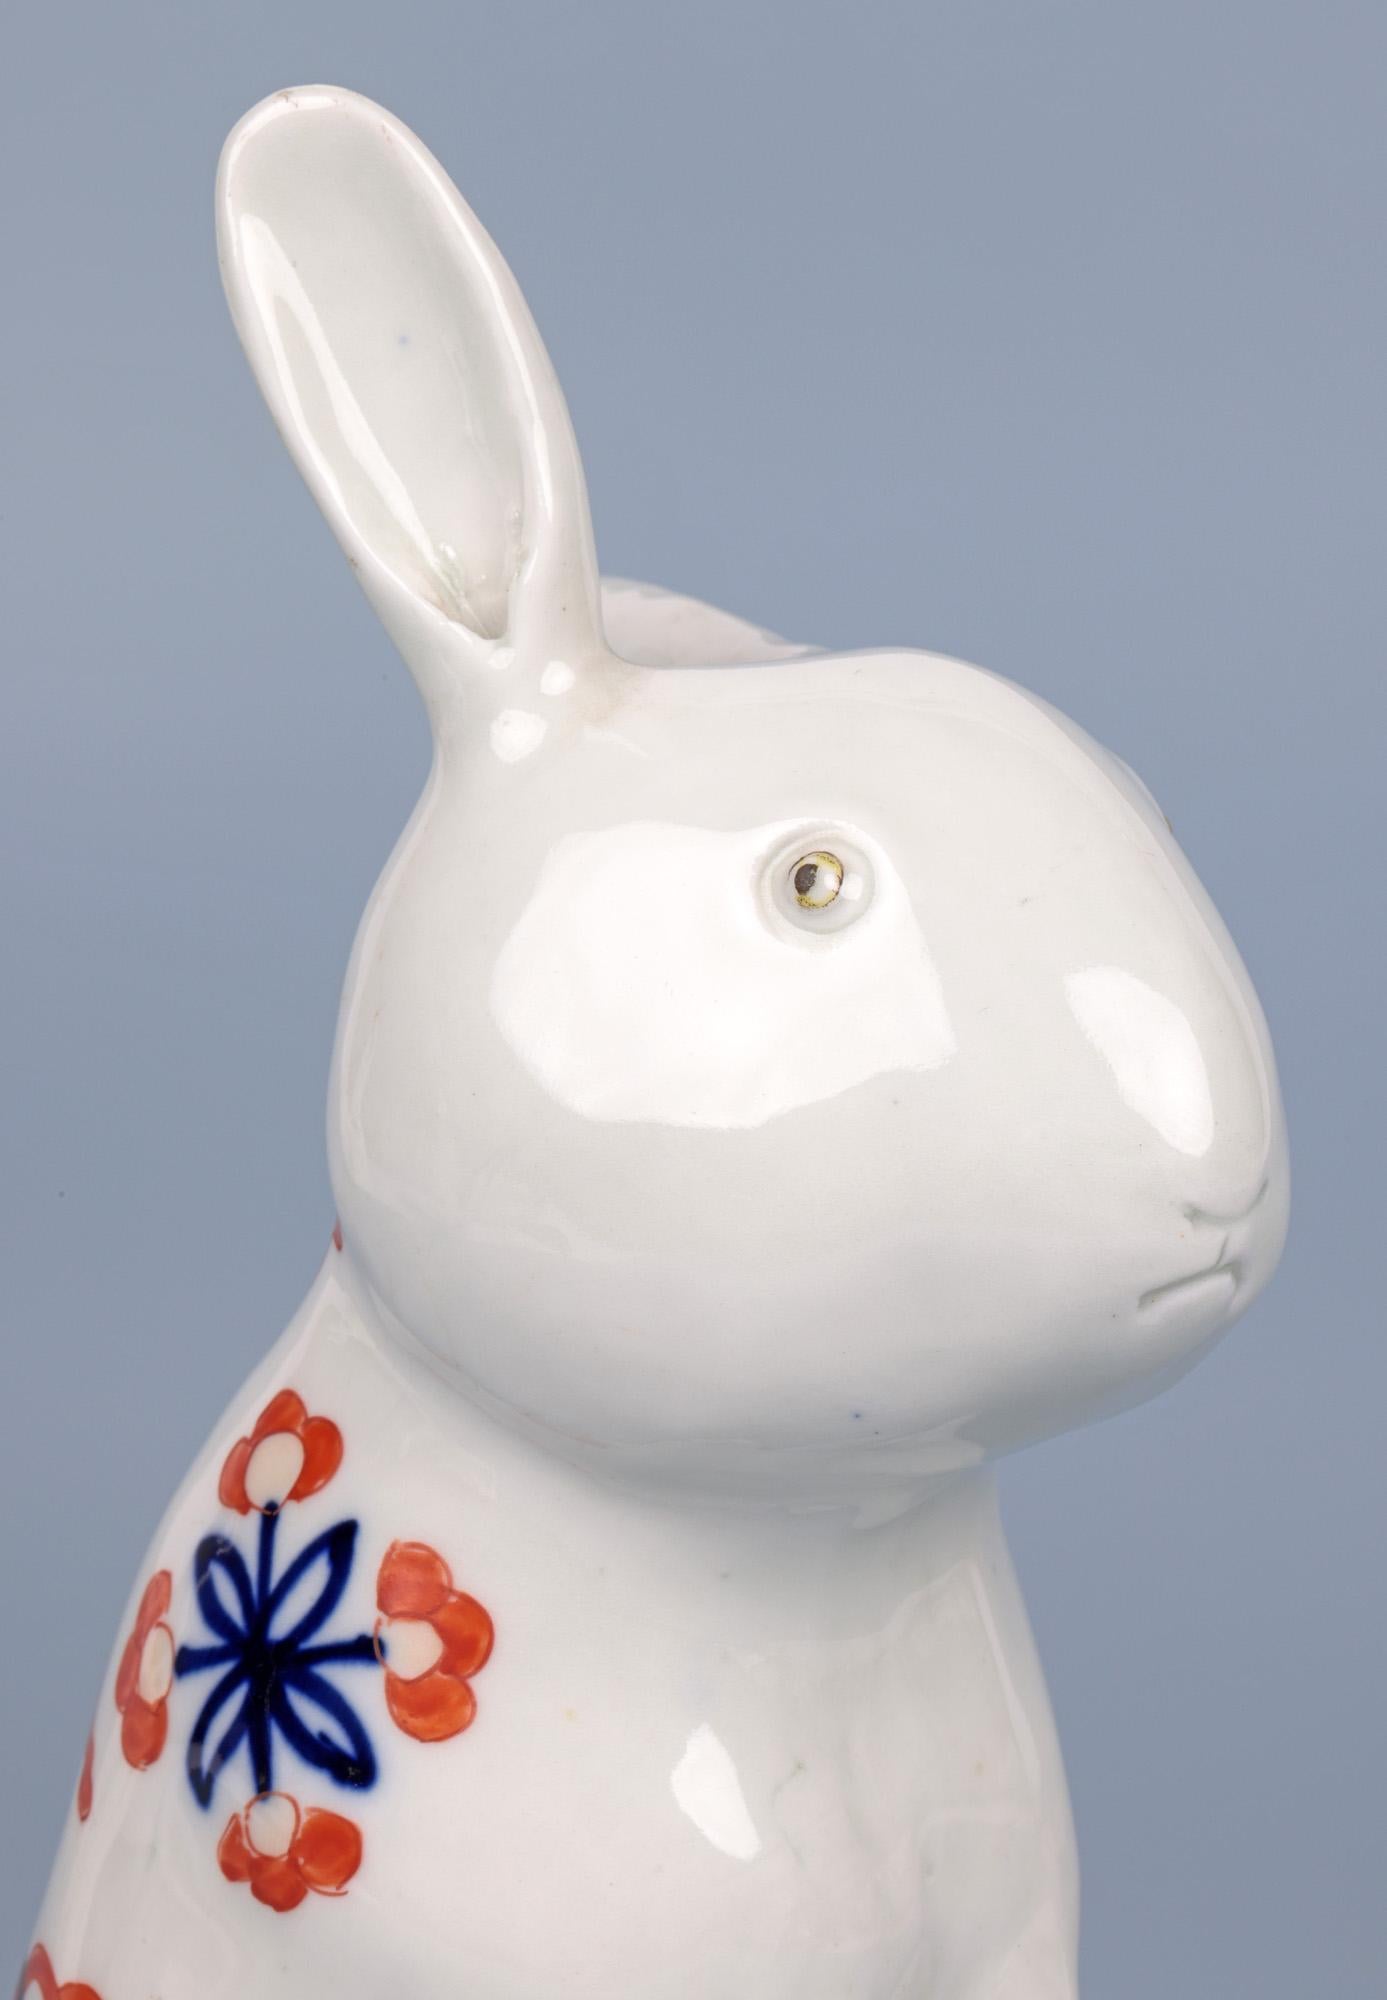 A delightful and amusing Japanese Imari study of a seated rabbit dating from the late Meiji period, early 20th century. The Rabbit, made in porcelain has a dis-proportionate head to body and with short limbs. The rabbit sits on his haunches with its